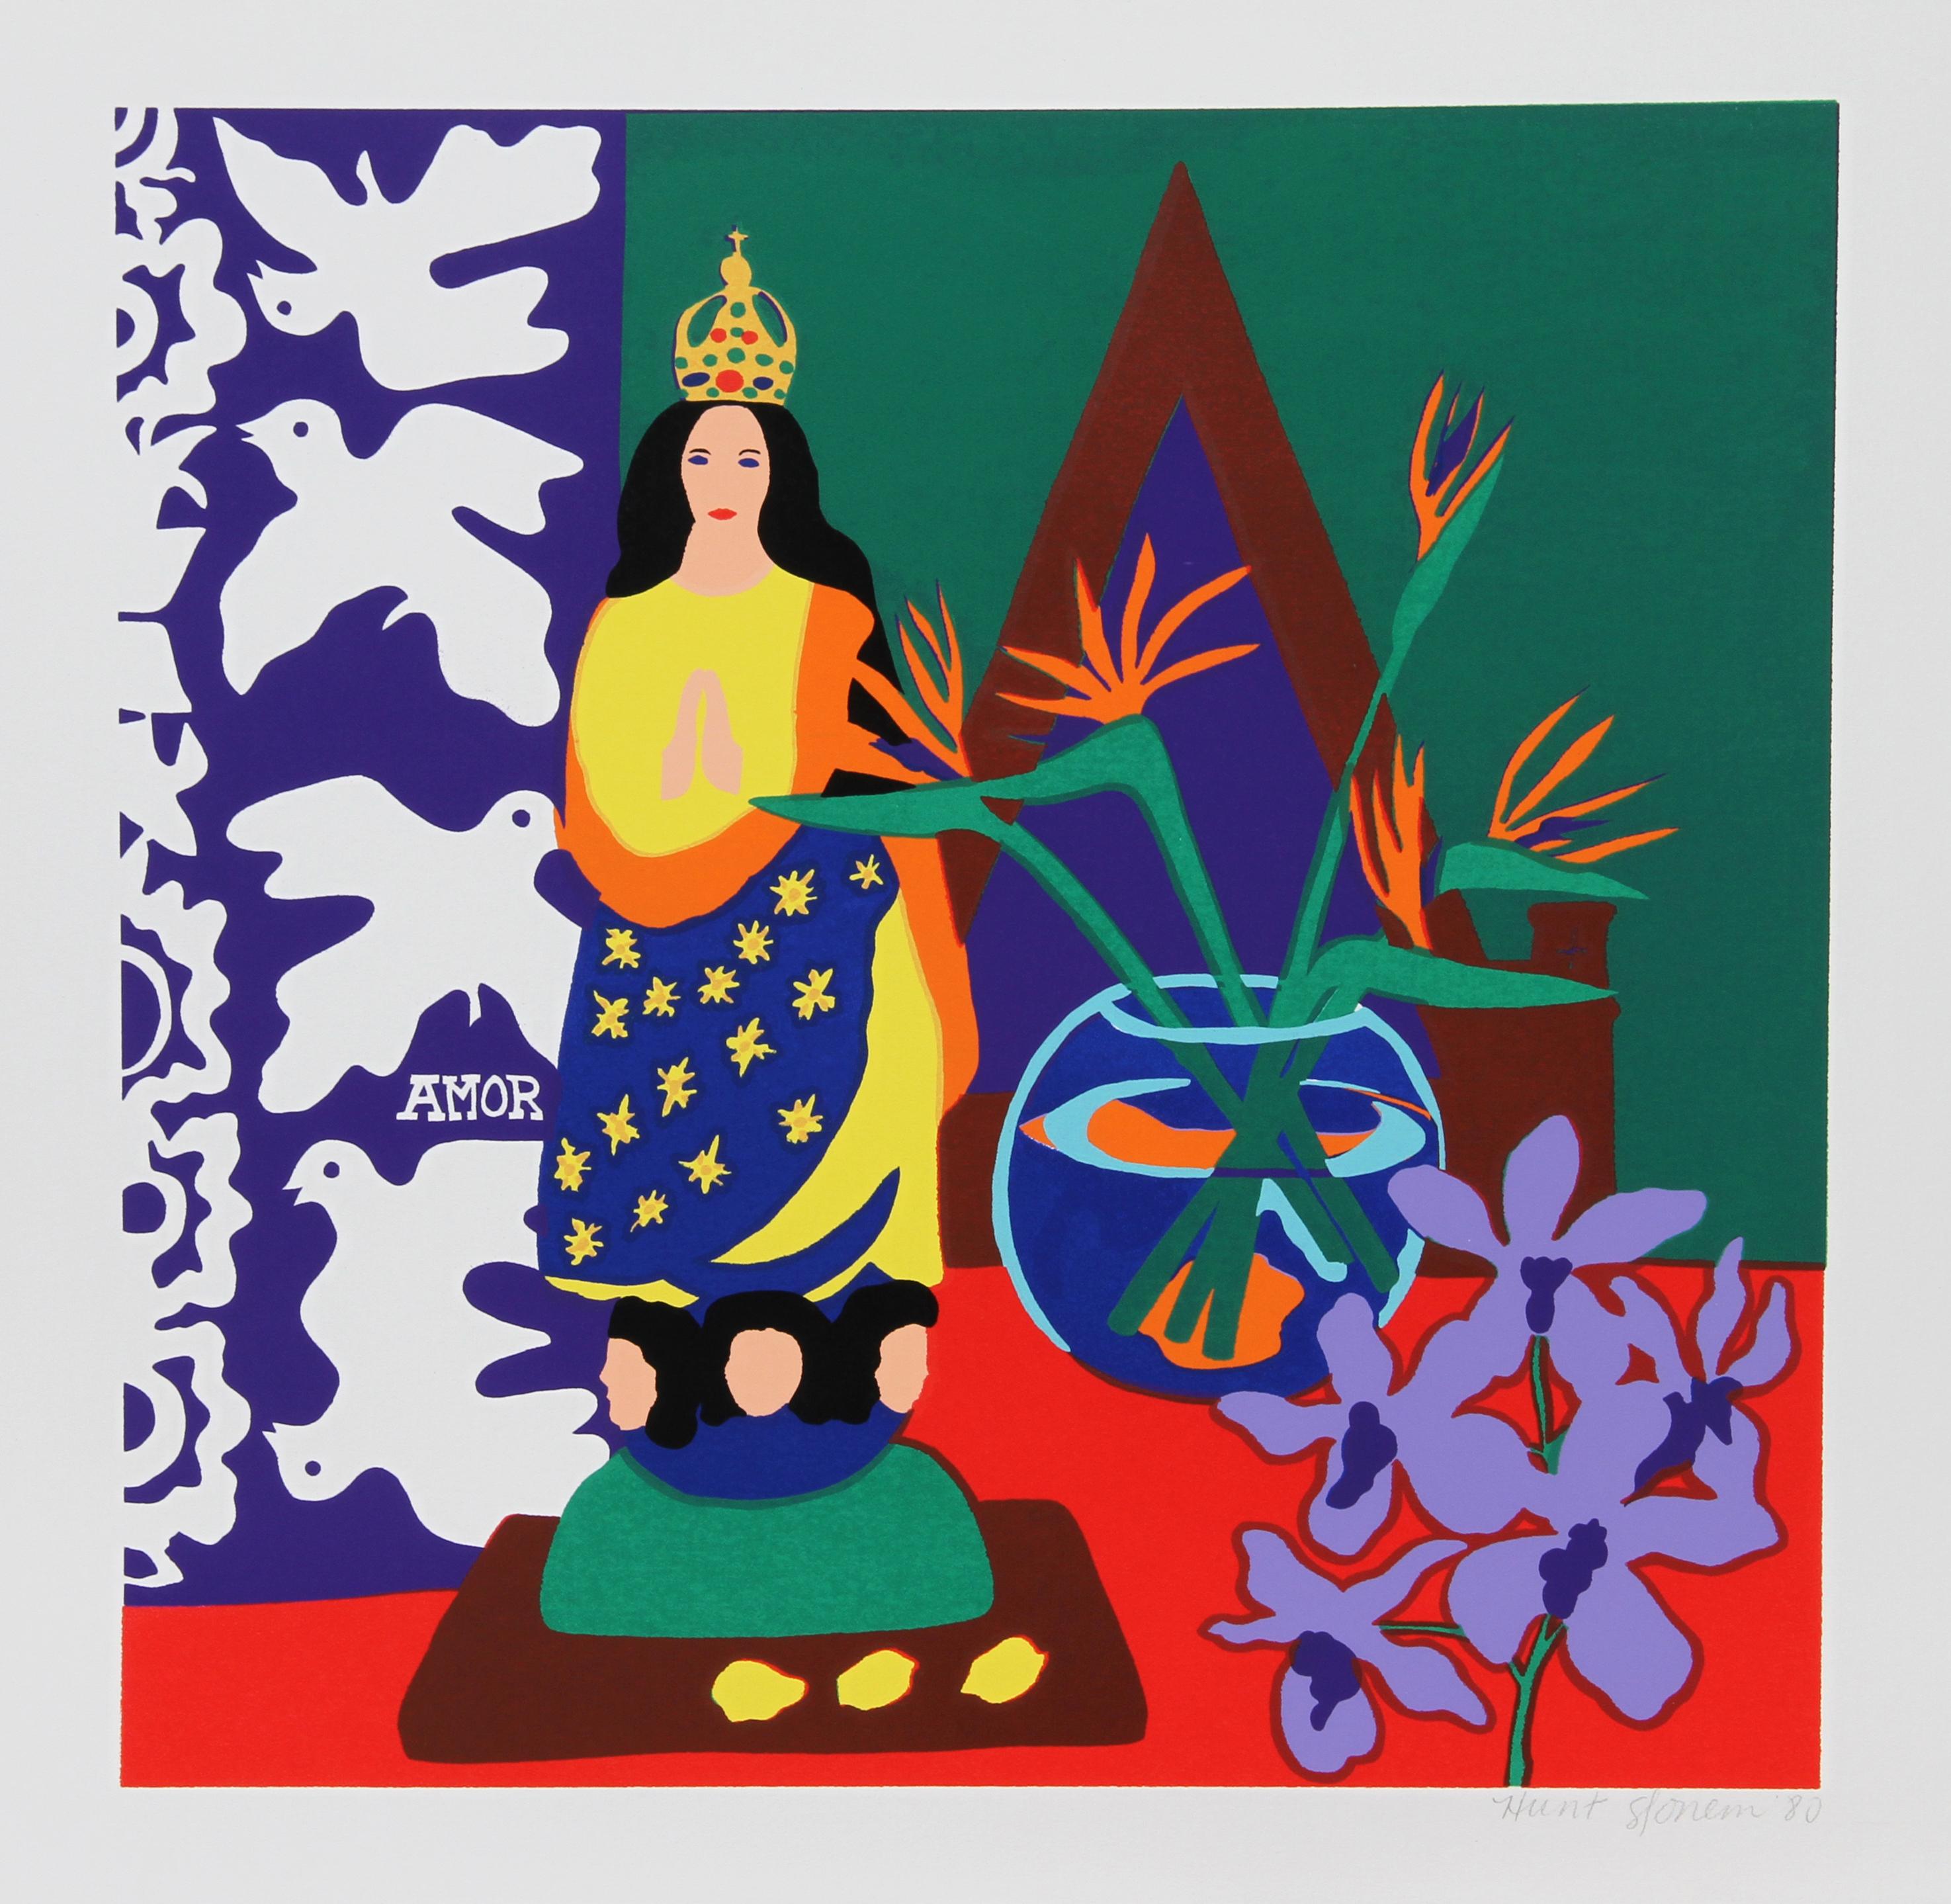 A colorful print by American Neo-Expressionist artist Hunt Slonem in his two-dimensional style. As an artist, Slonem is best known for incorporating mysticism, animal motifs, and multicultural symbols into his works, as seen in this image. The